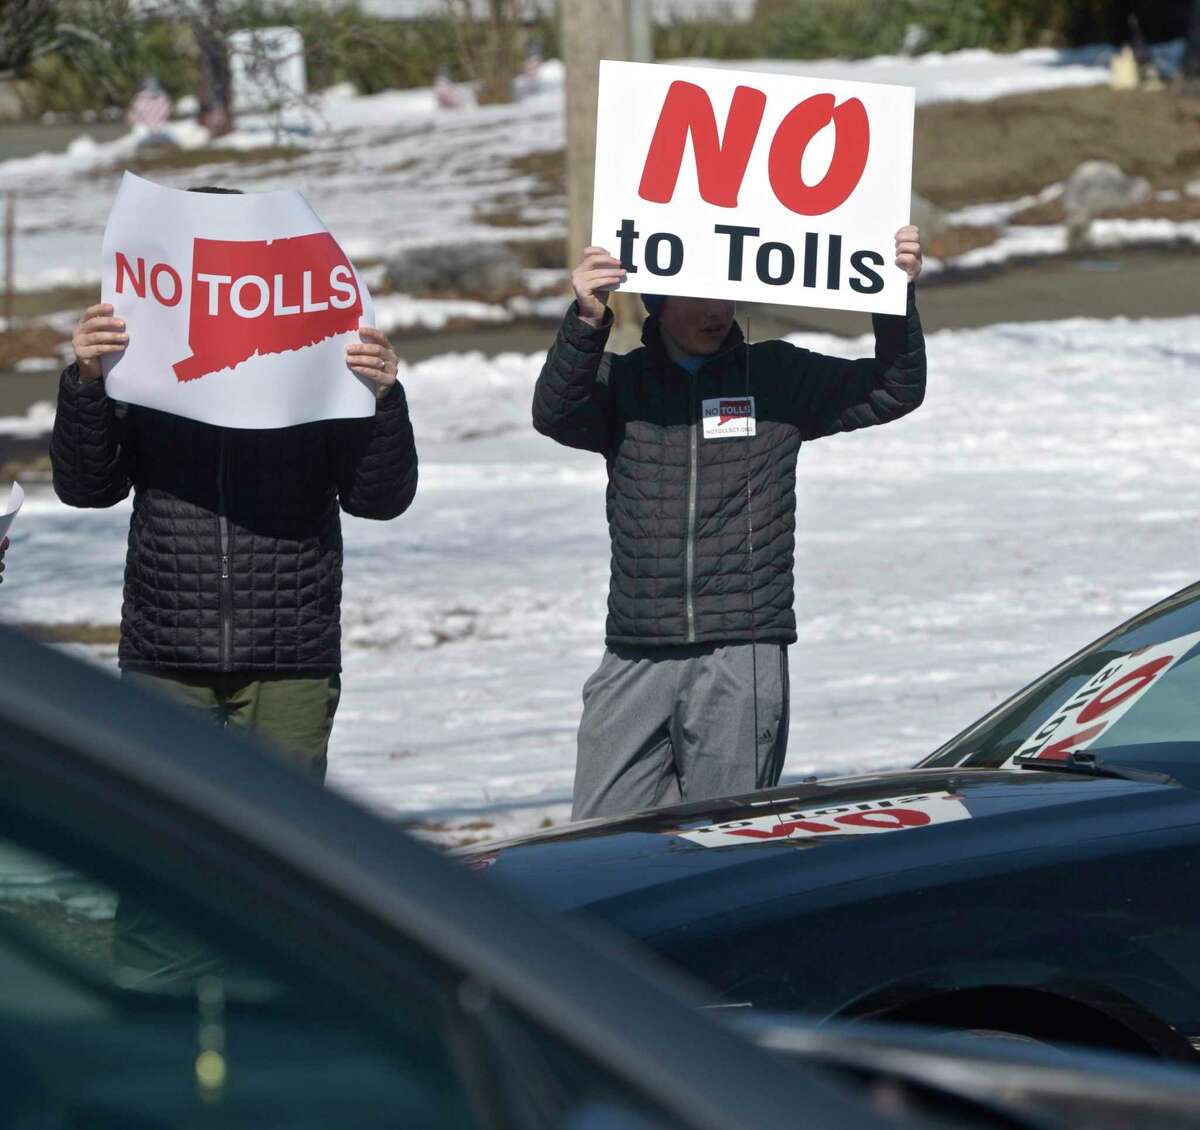 An anti-toll protest in Danbury earlier this year.